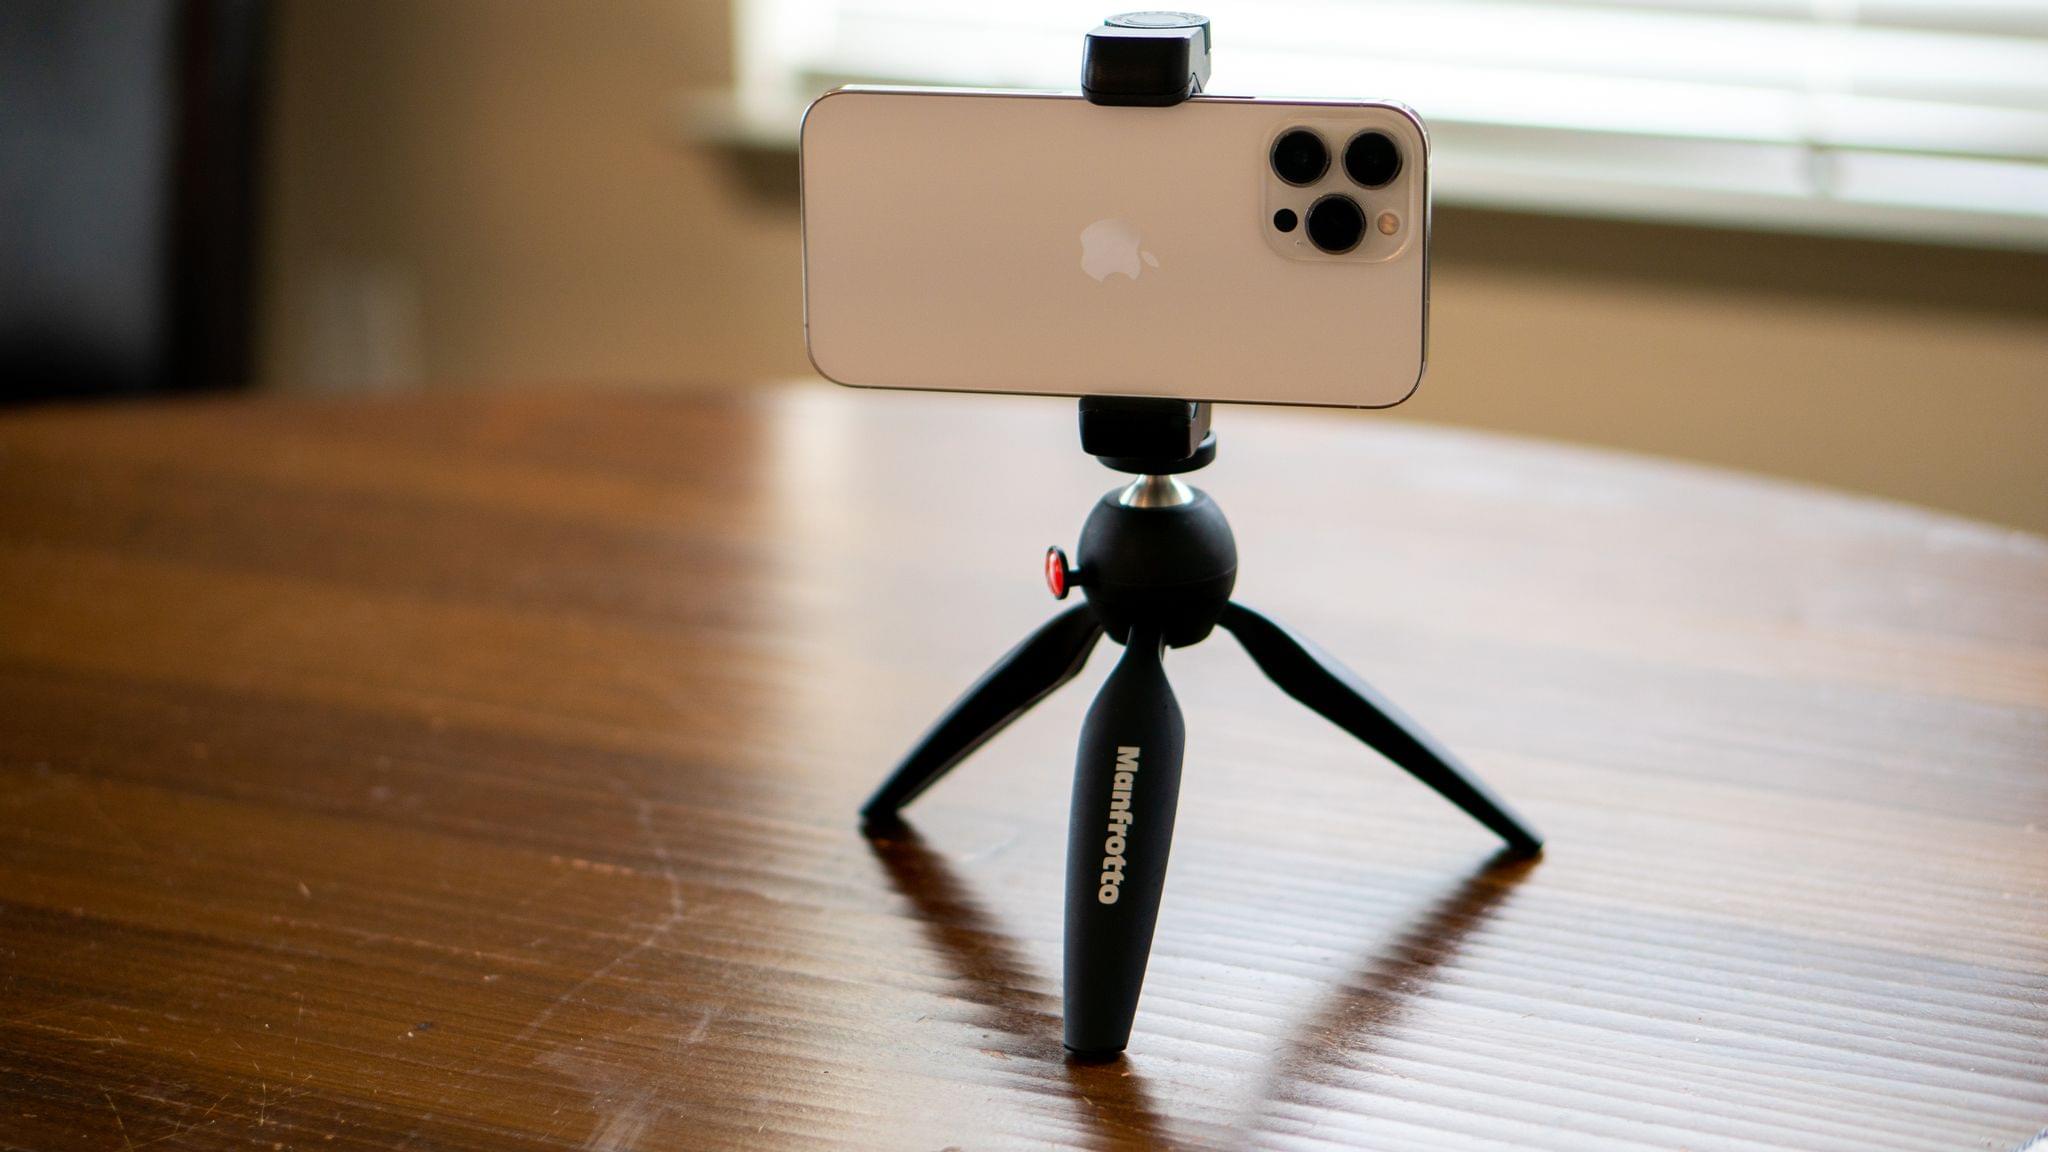 Another option is to use a tripod with your iPhone.